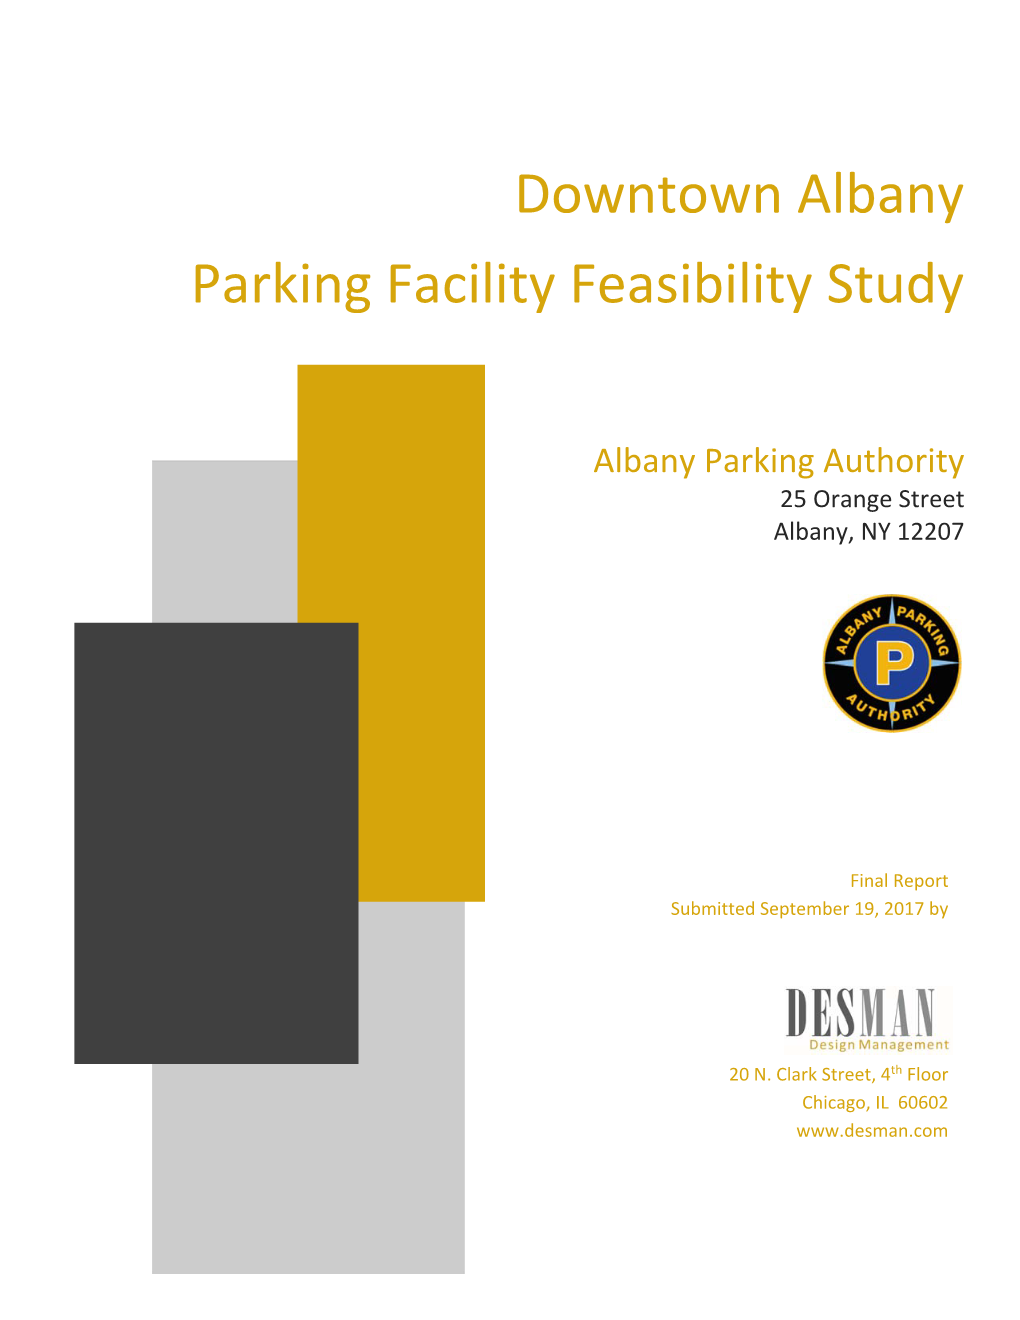 Downtown Albany Parking Facility Feasibility Study